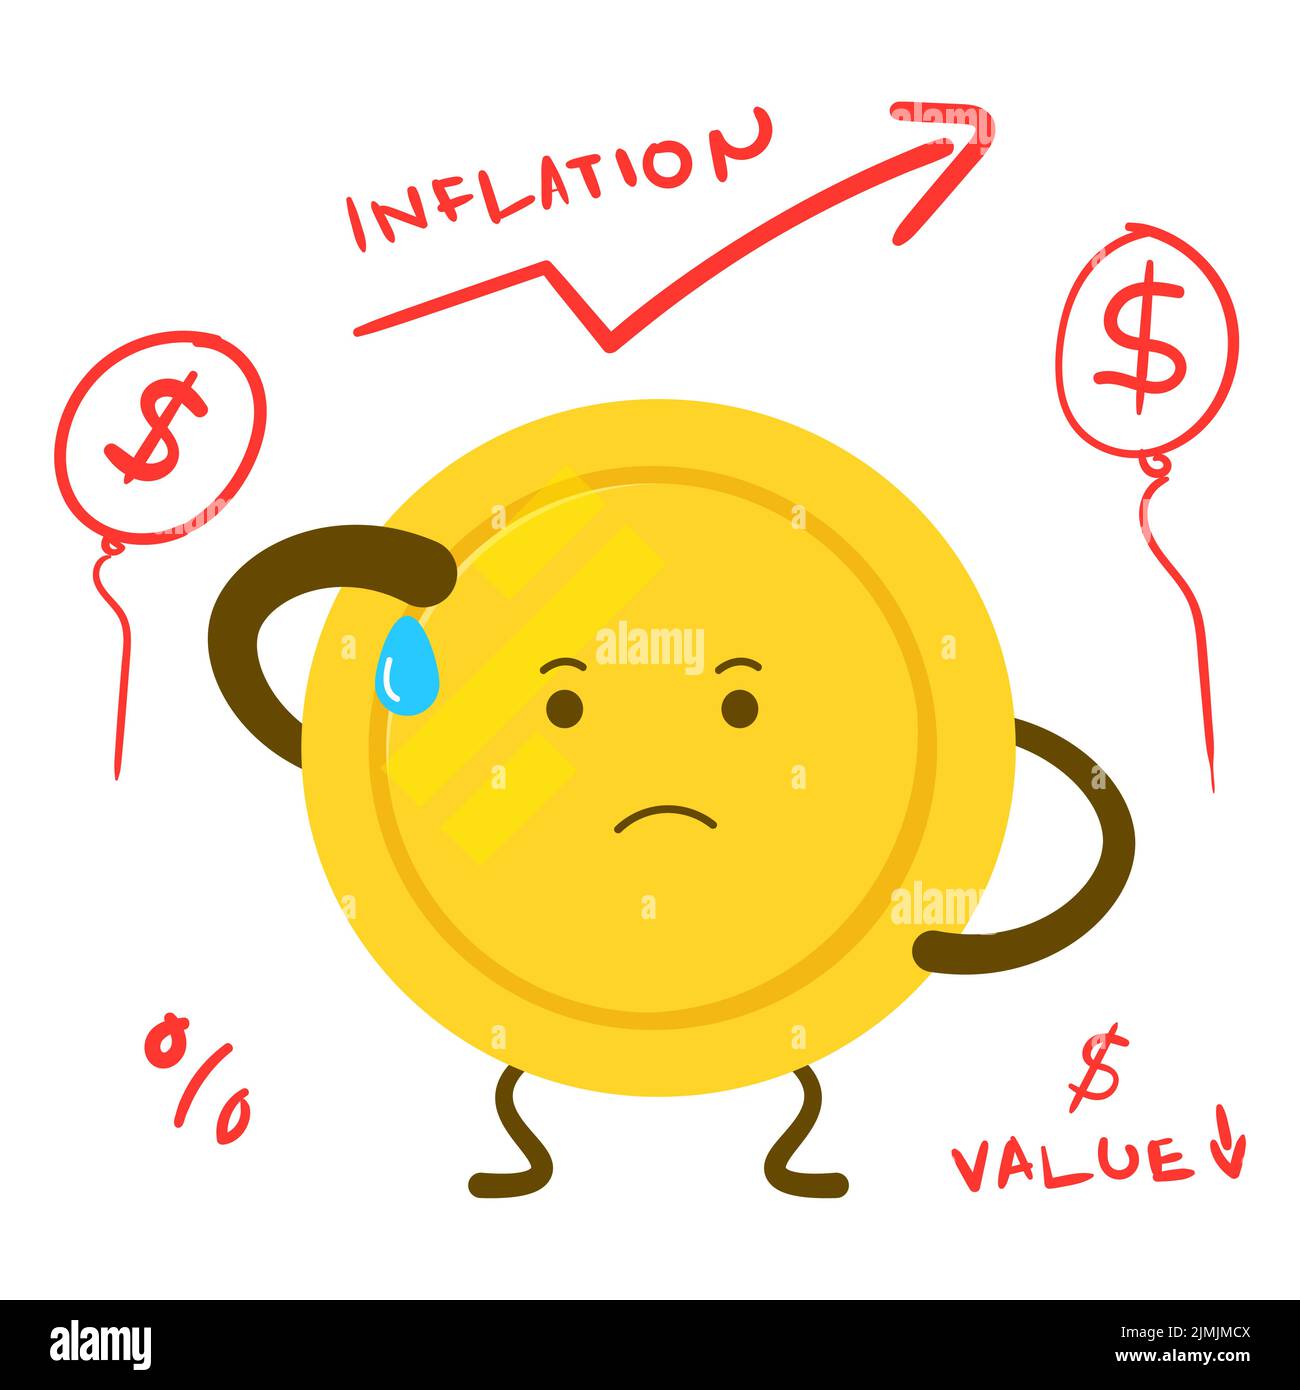 tired coin illustration with rising inflation chart with handwritten text and graphics vector Stock Vector